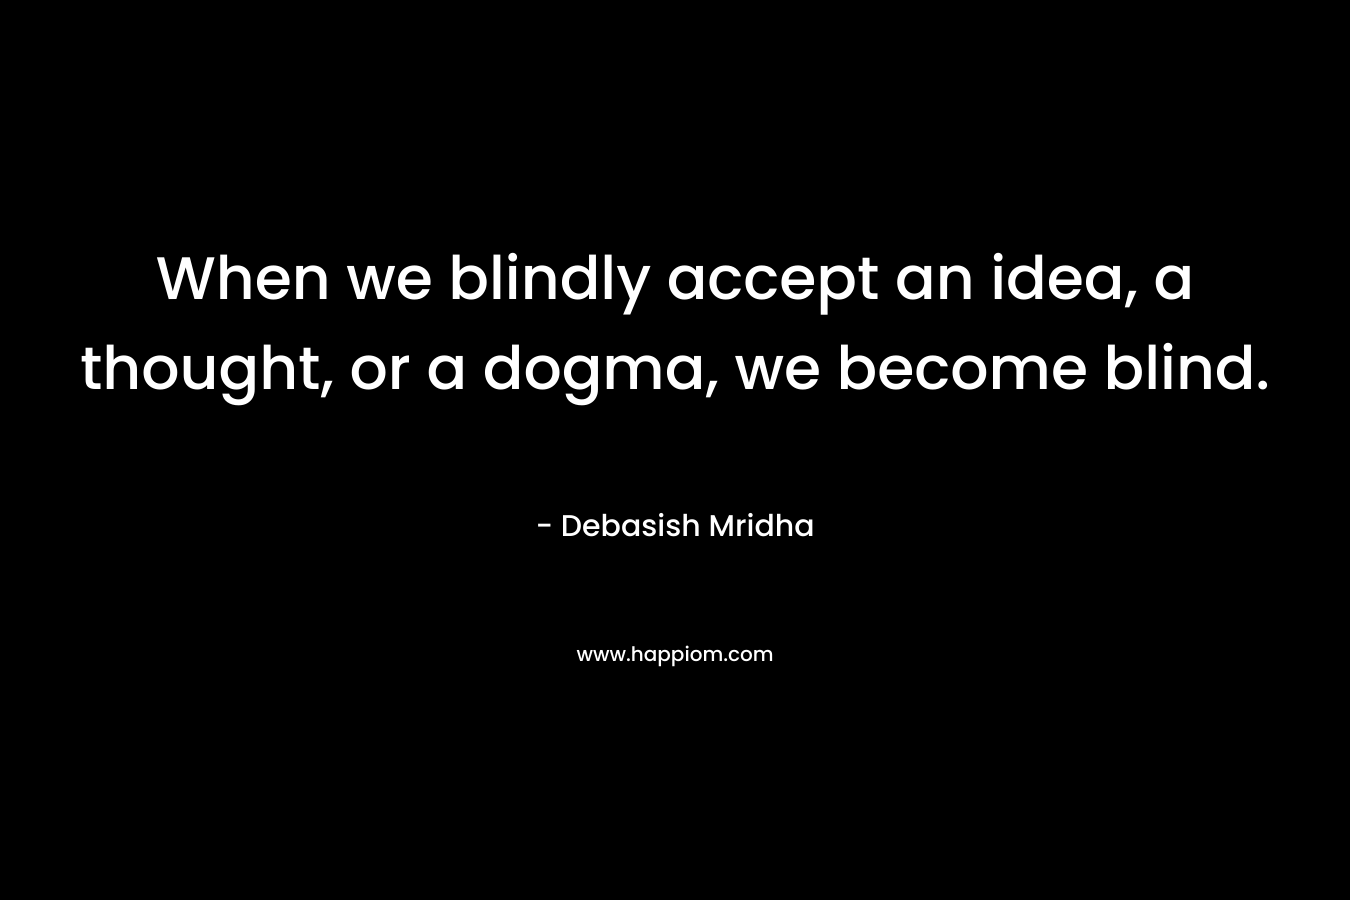 When we blindly accept an idea, a thought, or a dogma, we become blind. – Debasish Mridha